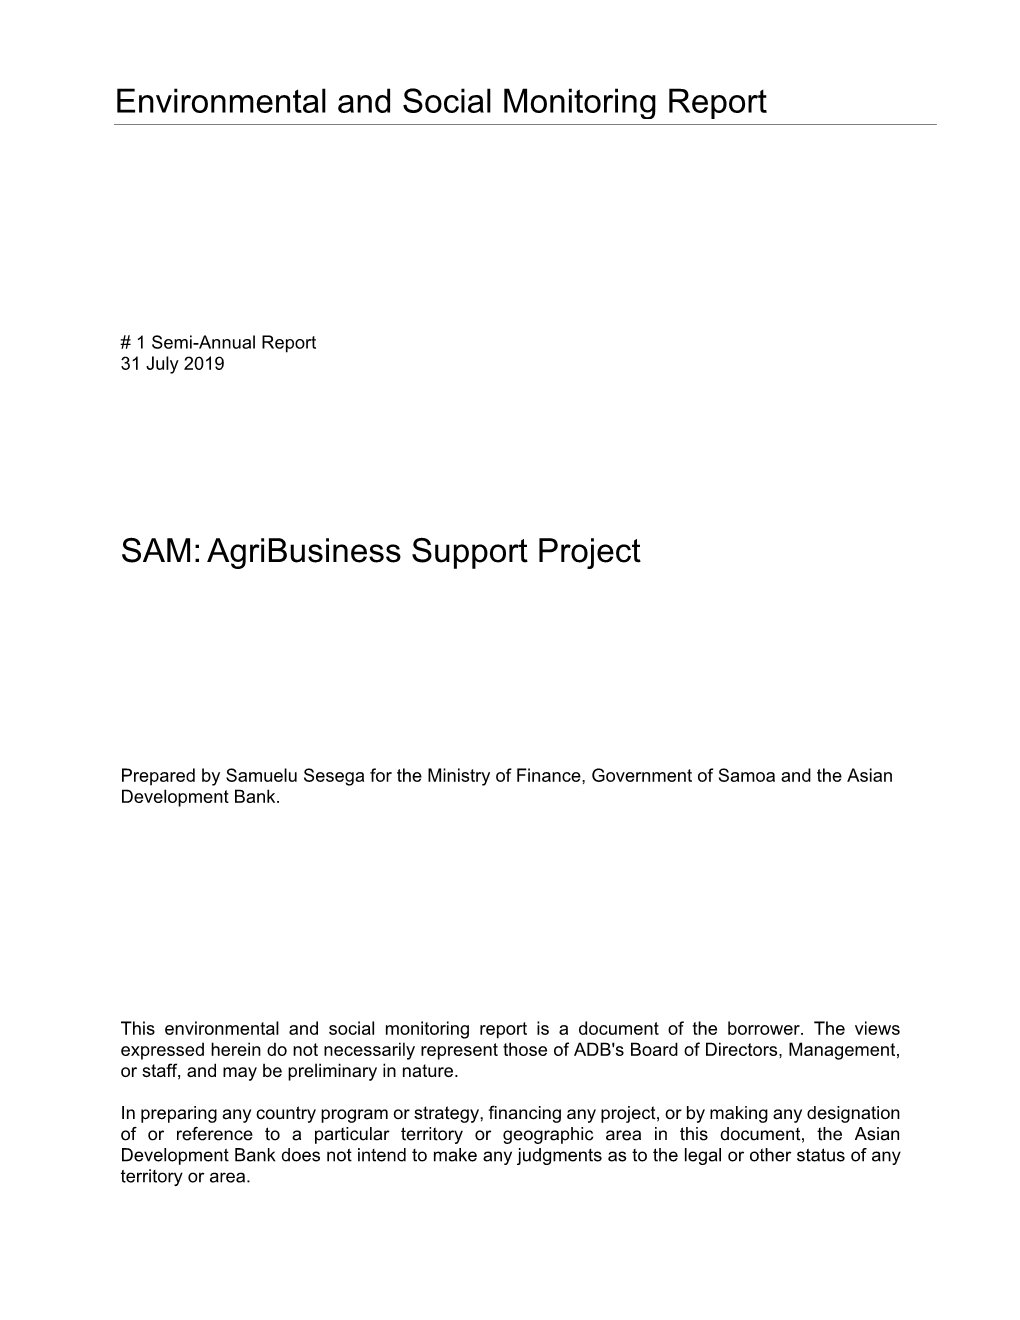 Samoa Agribusiness Support Project: Environmental and Social Monitoring Report